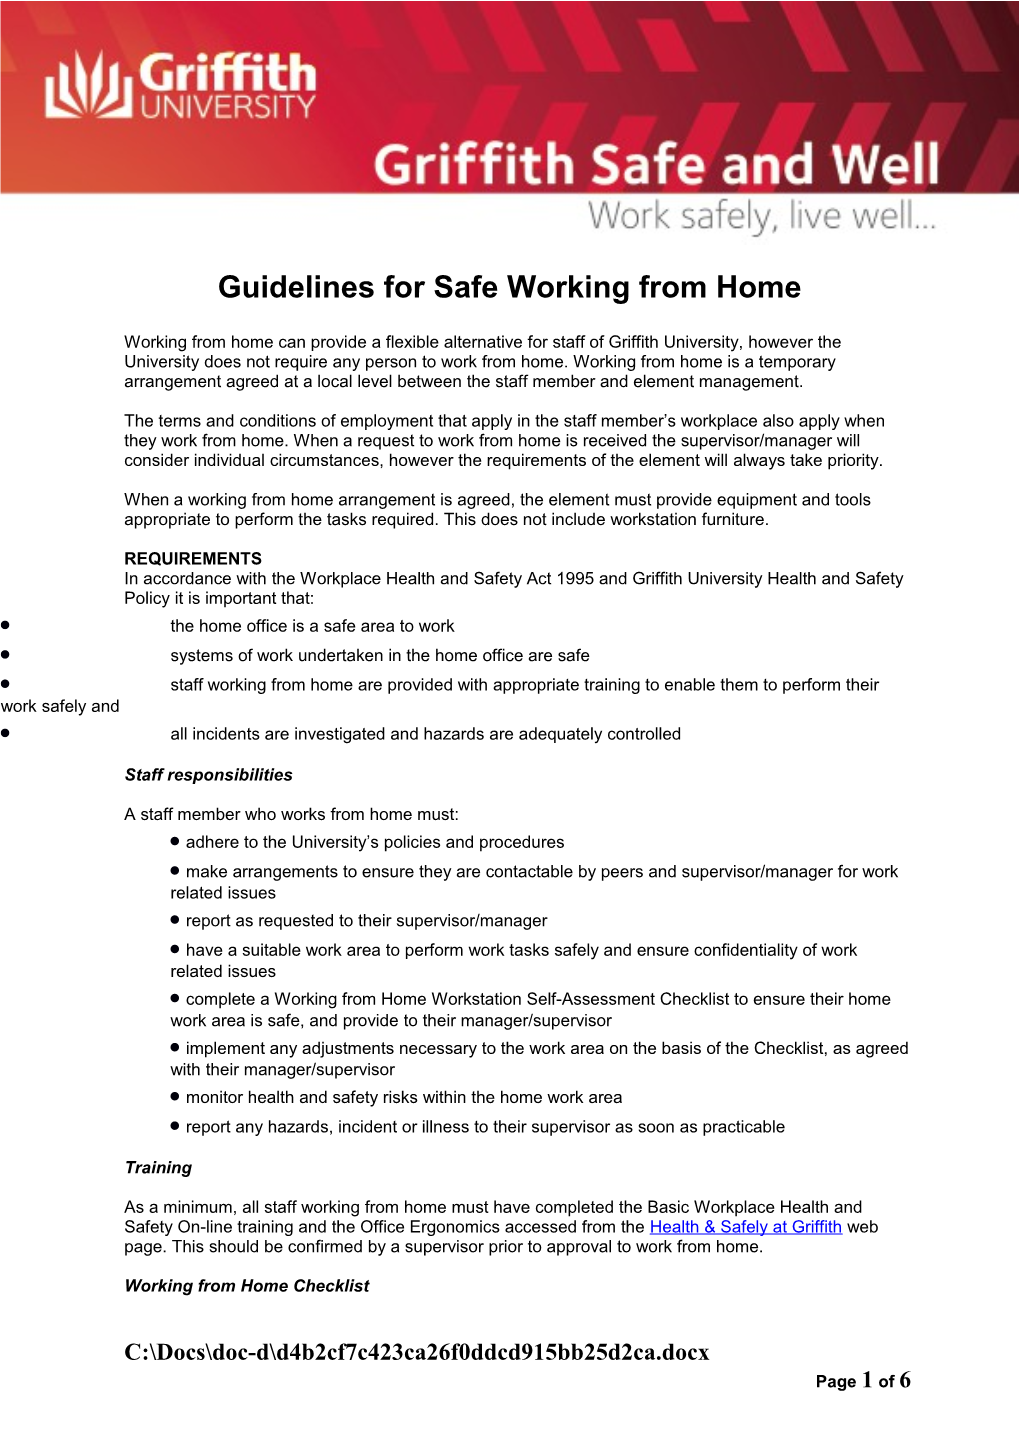 Guidelines for Safe Working from Home